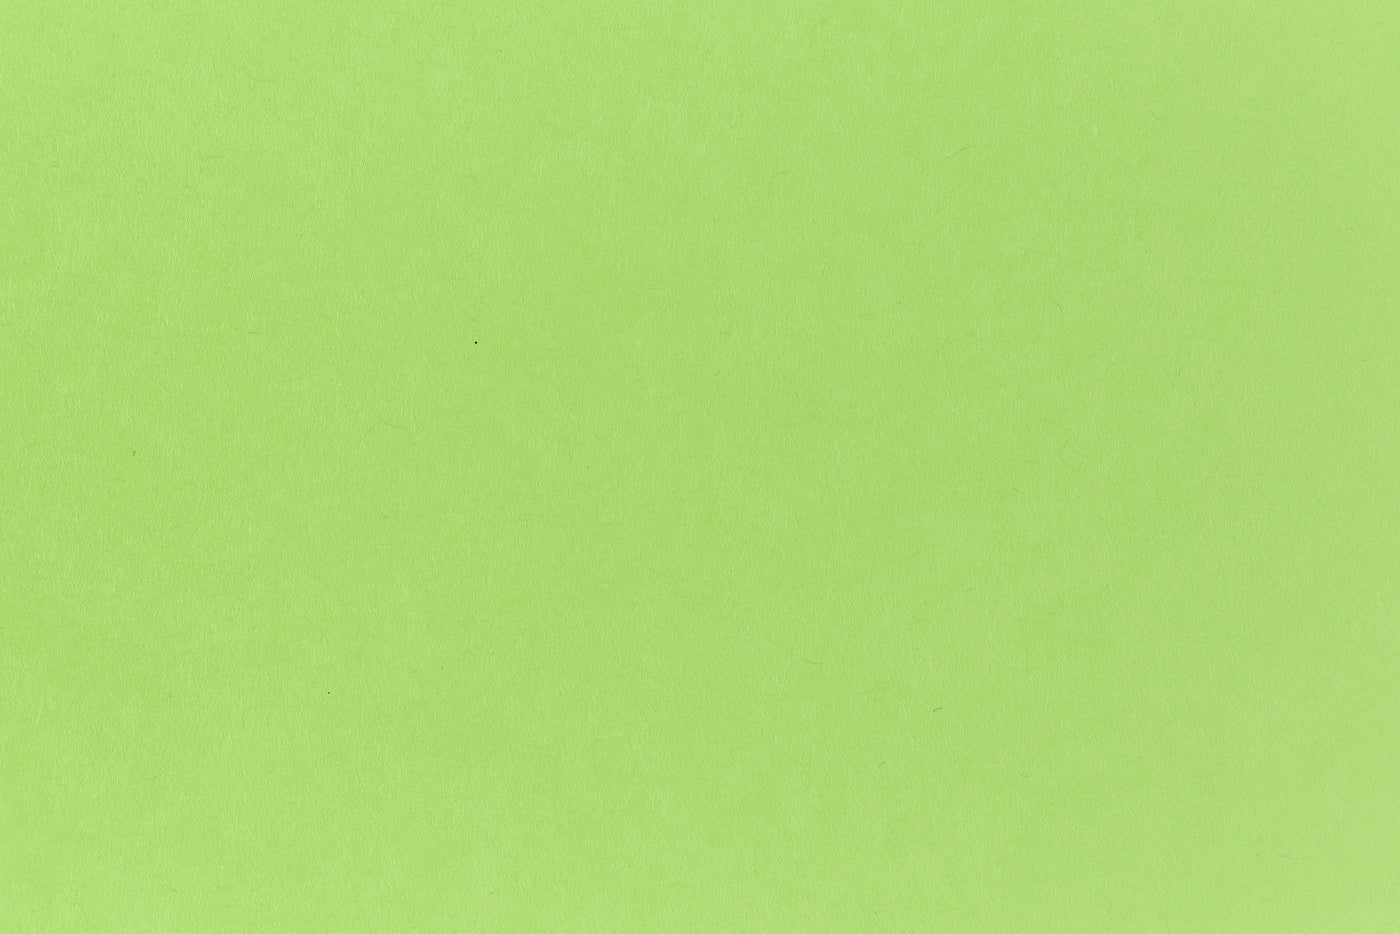 Bright green cardstock for crafting. 